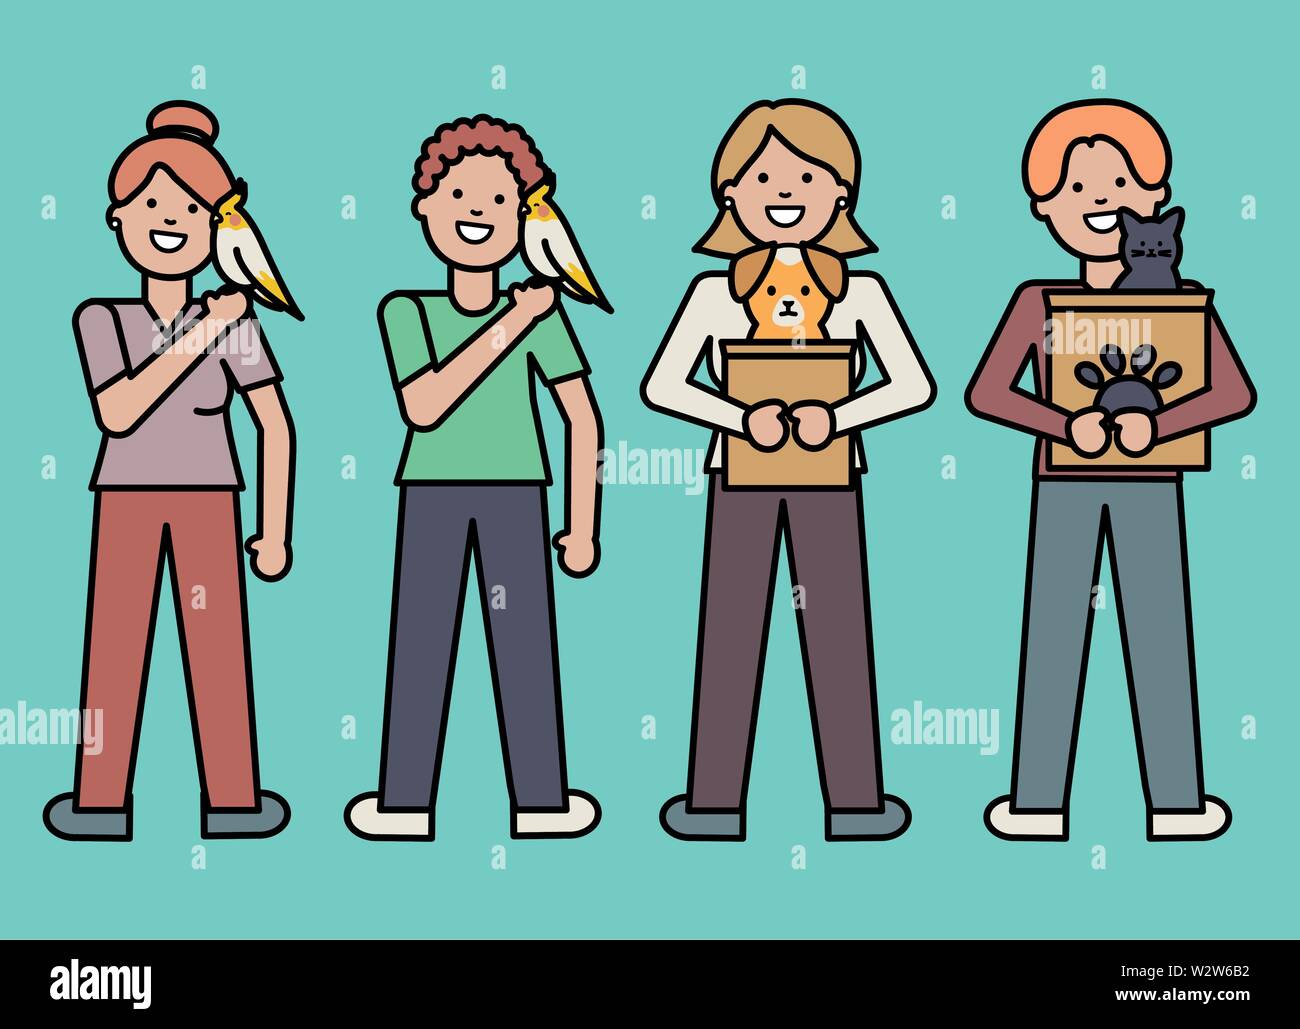 young people with adorables mascots vector illustration design Stock Vector